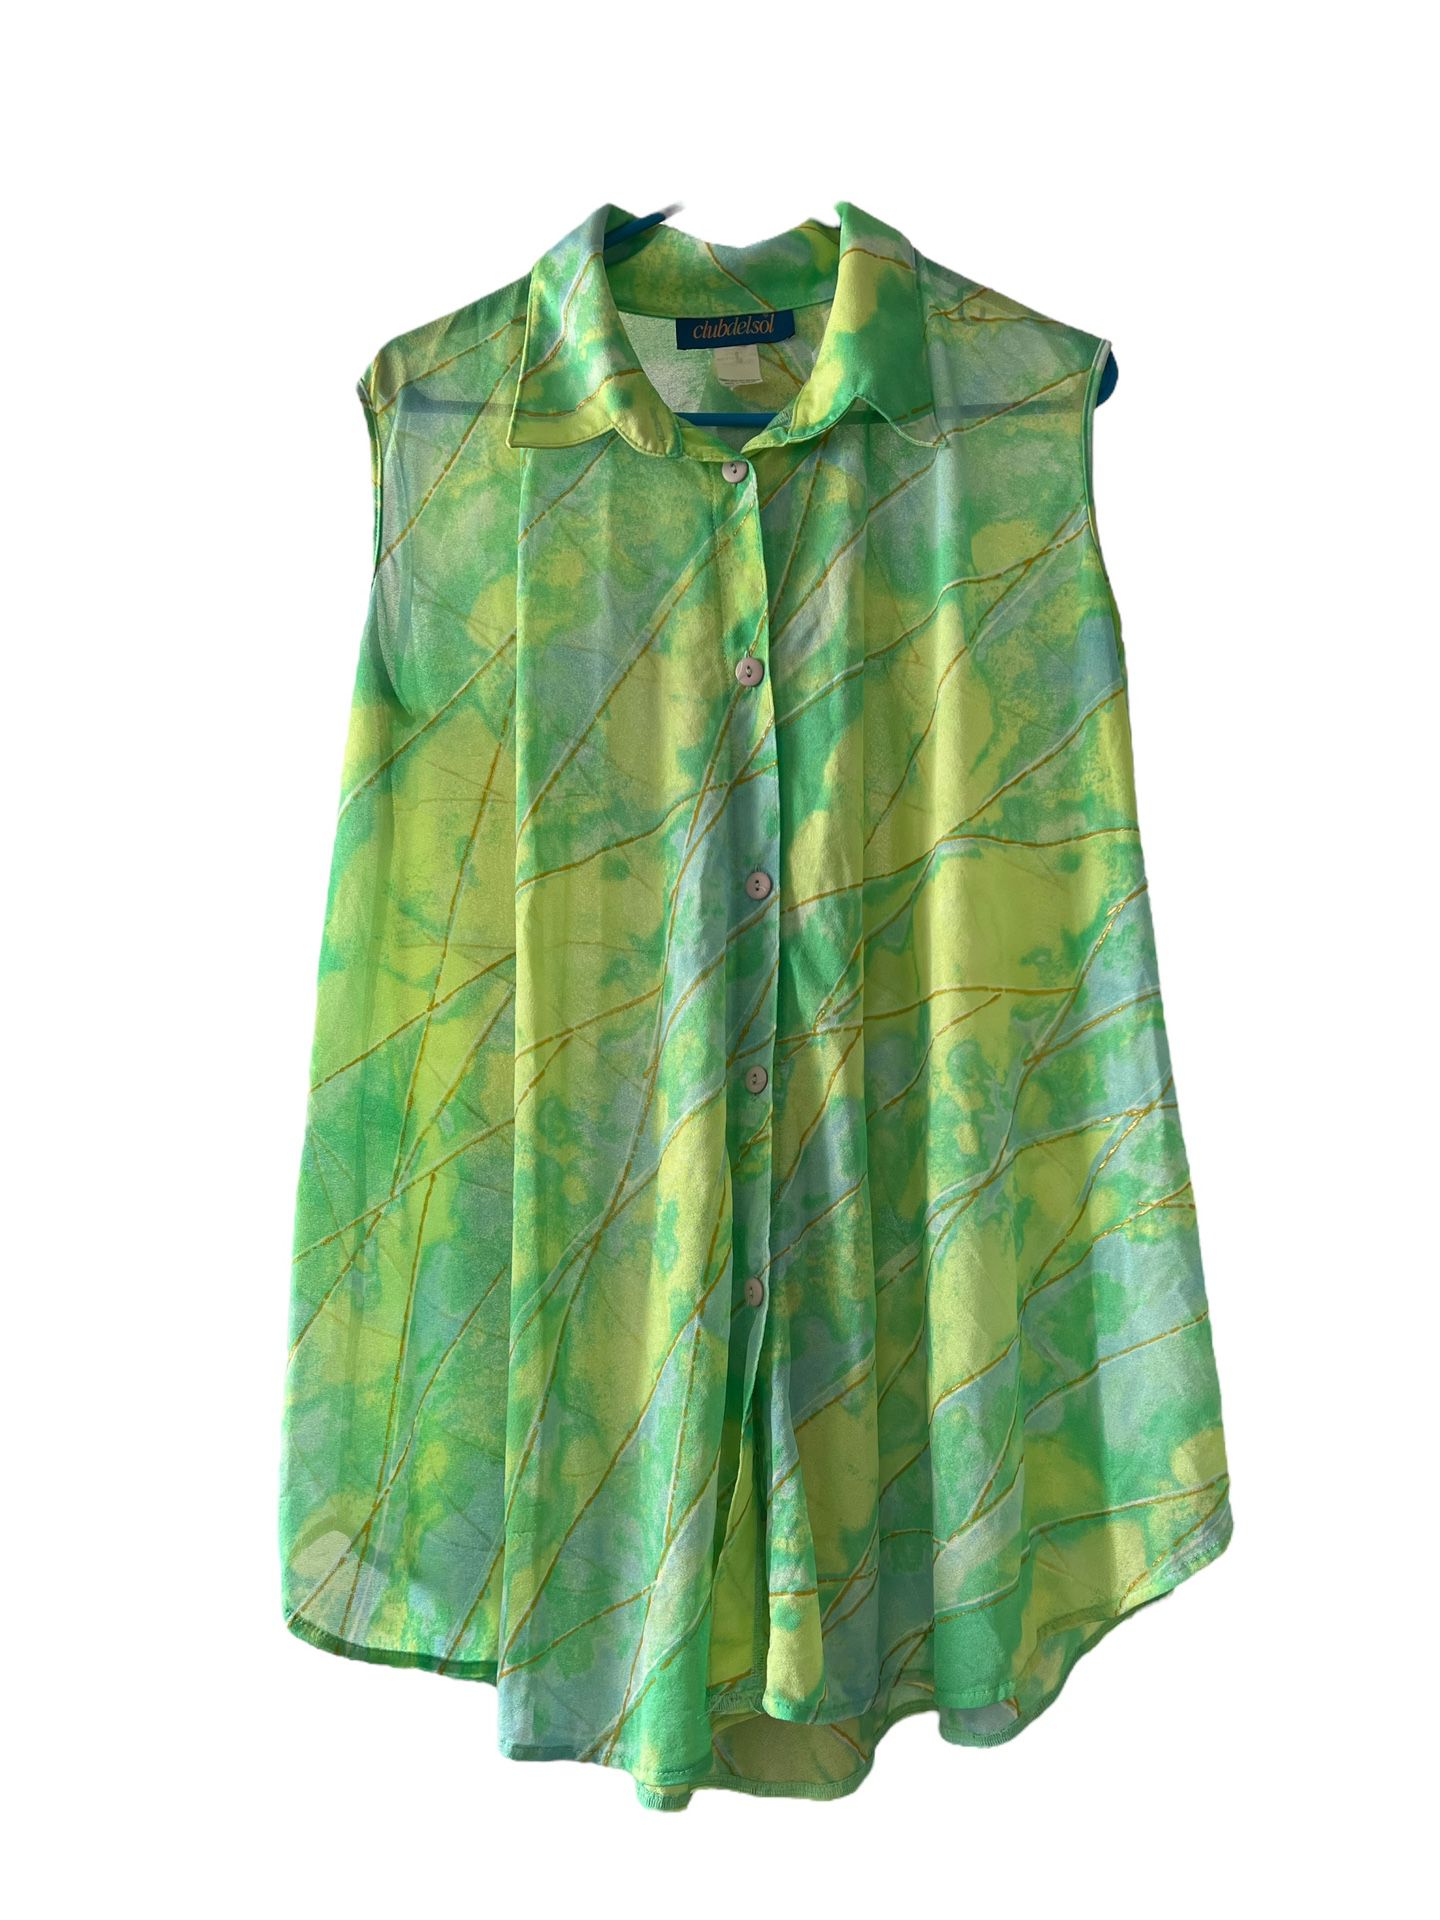 ART NOVEAU EVA TUNIC BY CLUB DEL SOL SWIMWEAR.  Cover Up Green Beautiful green with gold tones translucent. Comes from a pet and smoke free household.